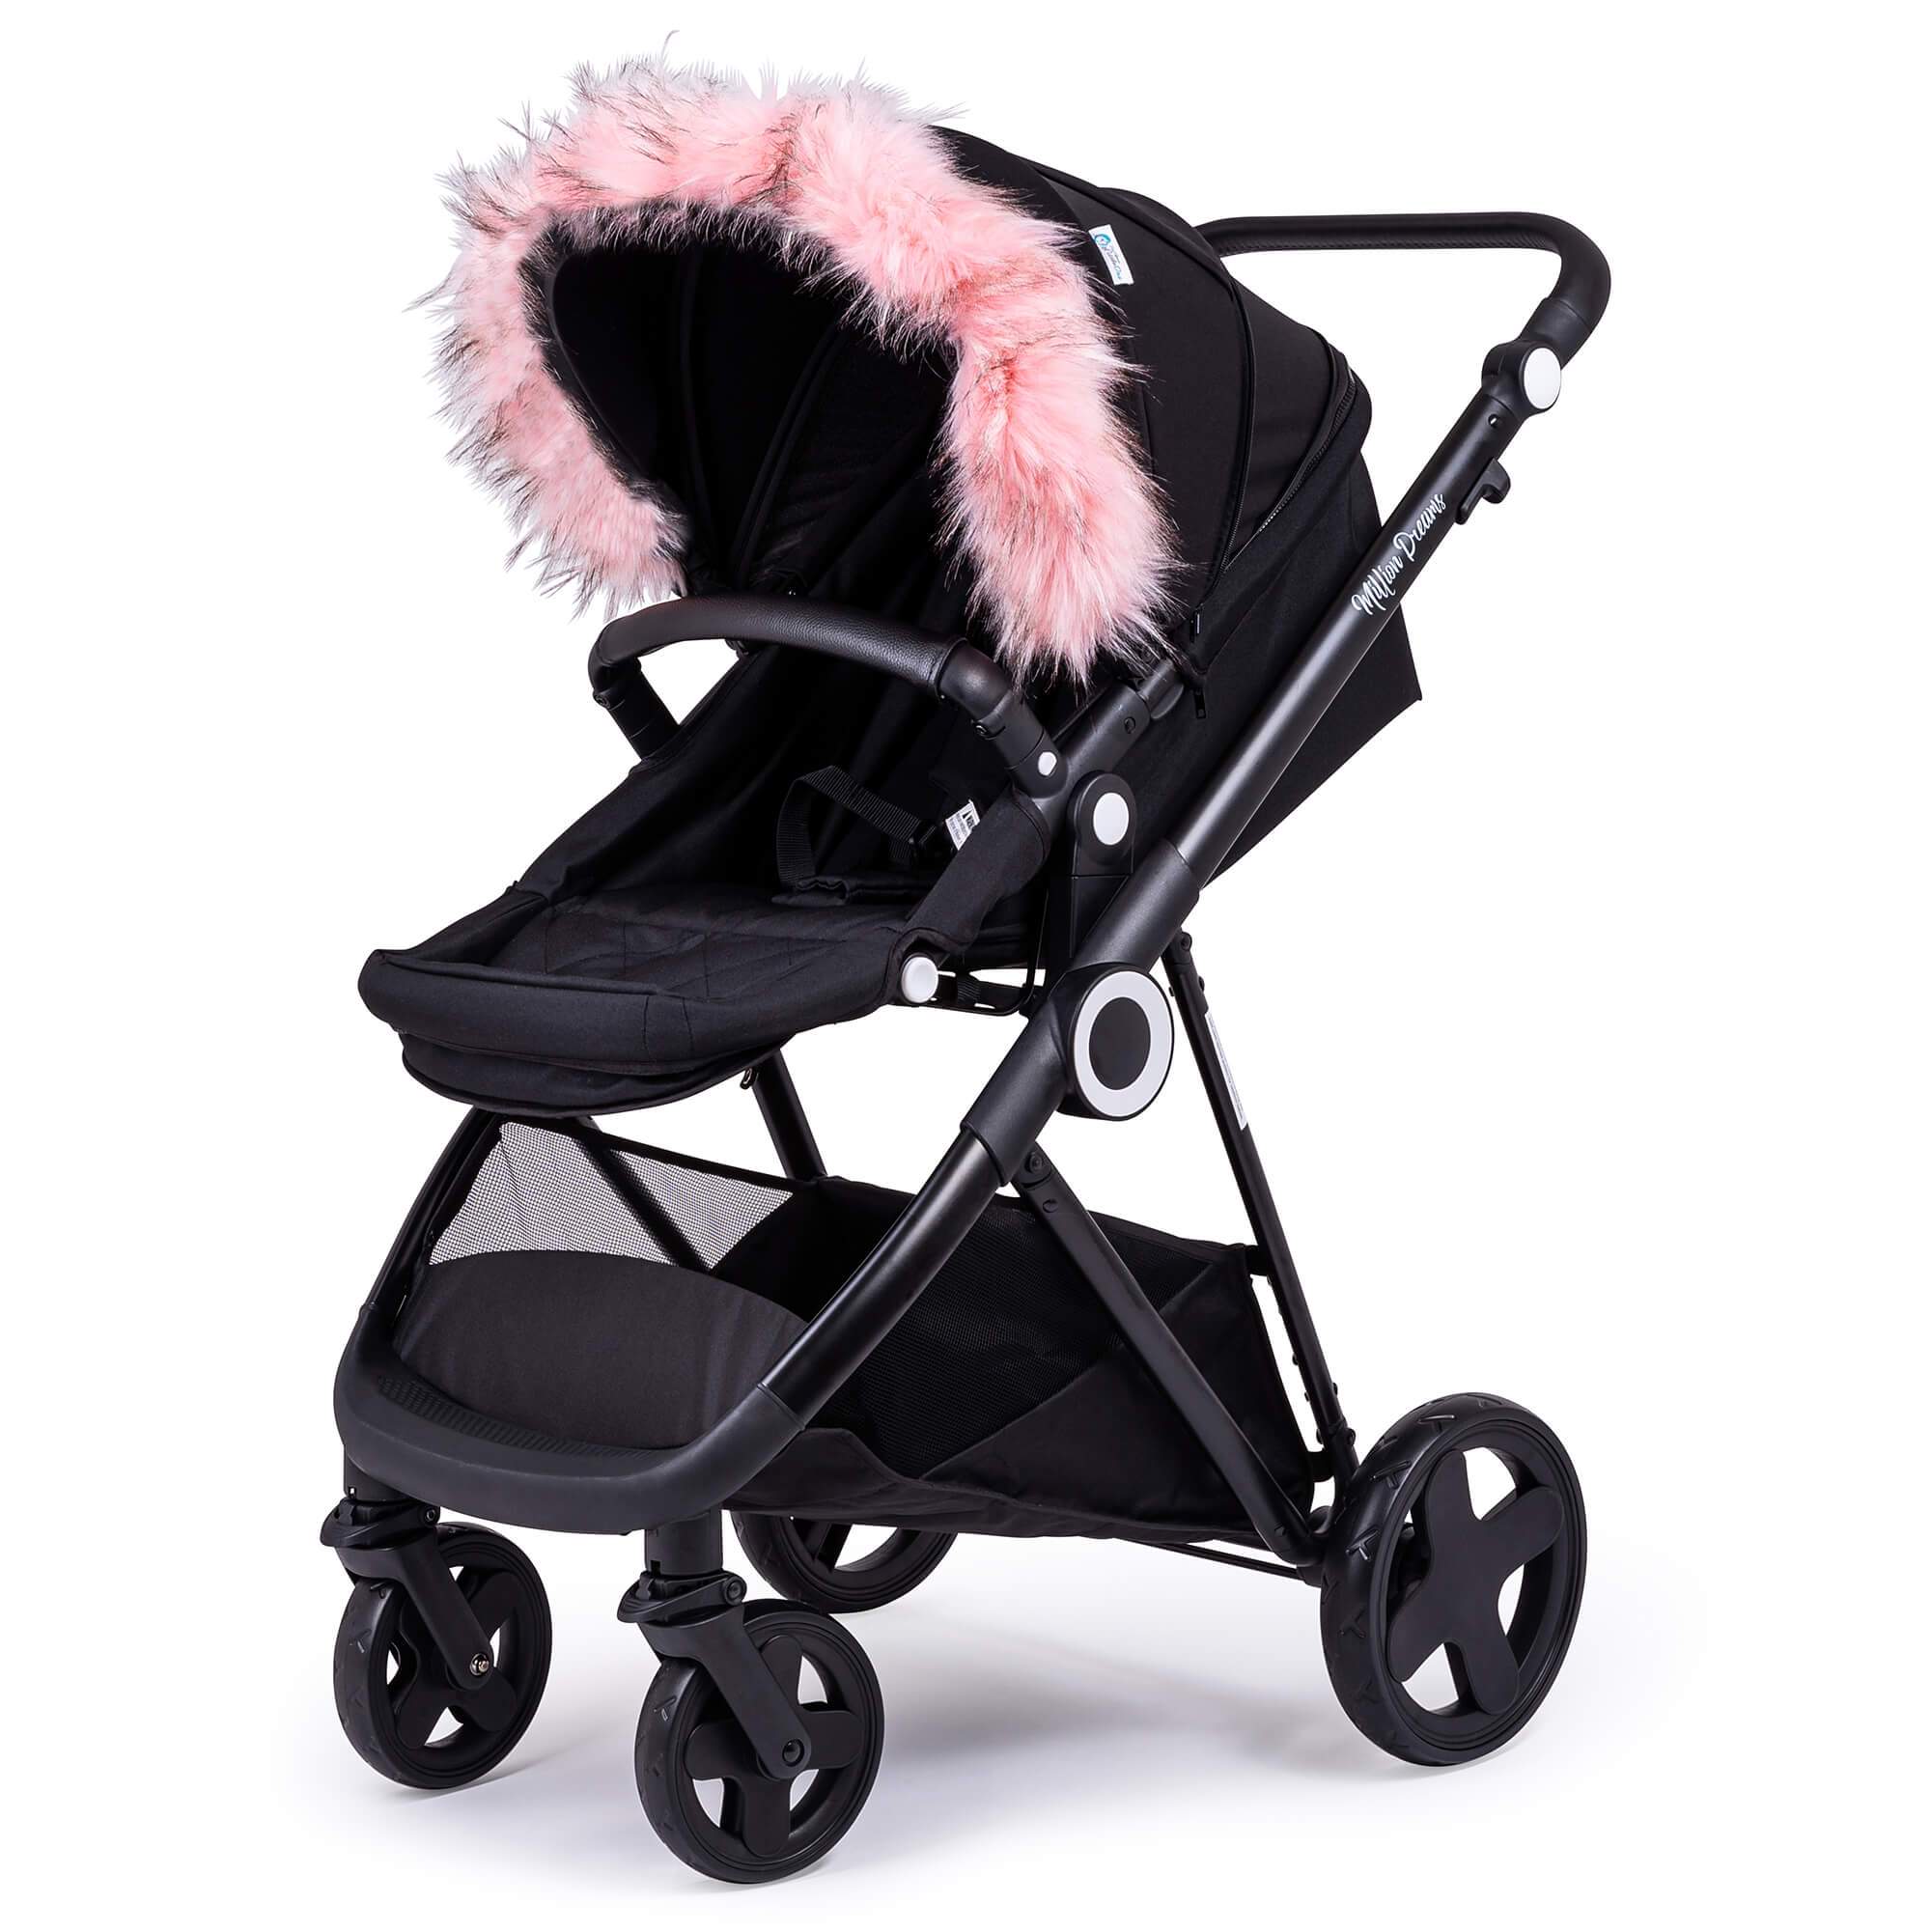 Pram Fur Hood Trim Attachment for Pushchair Compatible with Jane - Light Pink / Fits All Models | For Your Little One